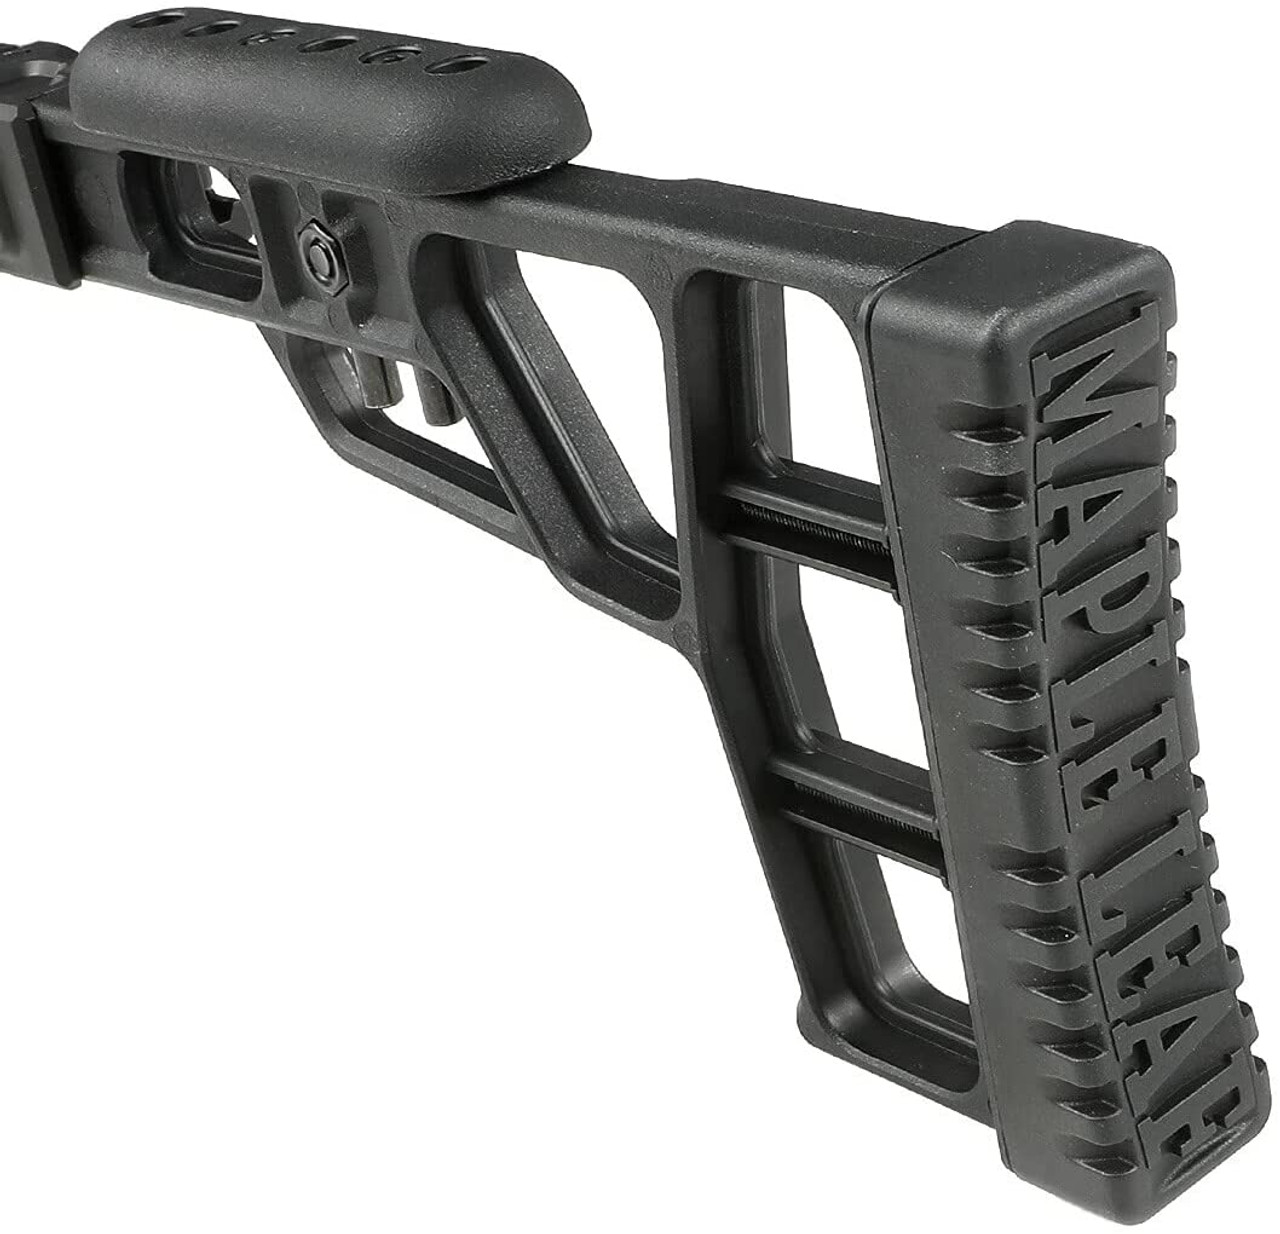 Maple Leaf MLC S2 rifle chassis set for VSR-10 (compatible with Tokyo Marui) 